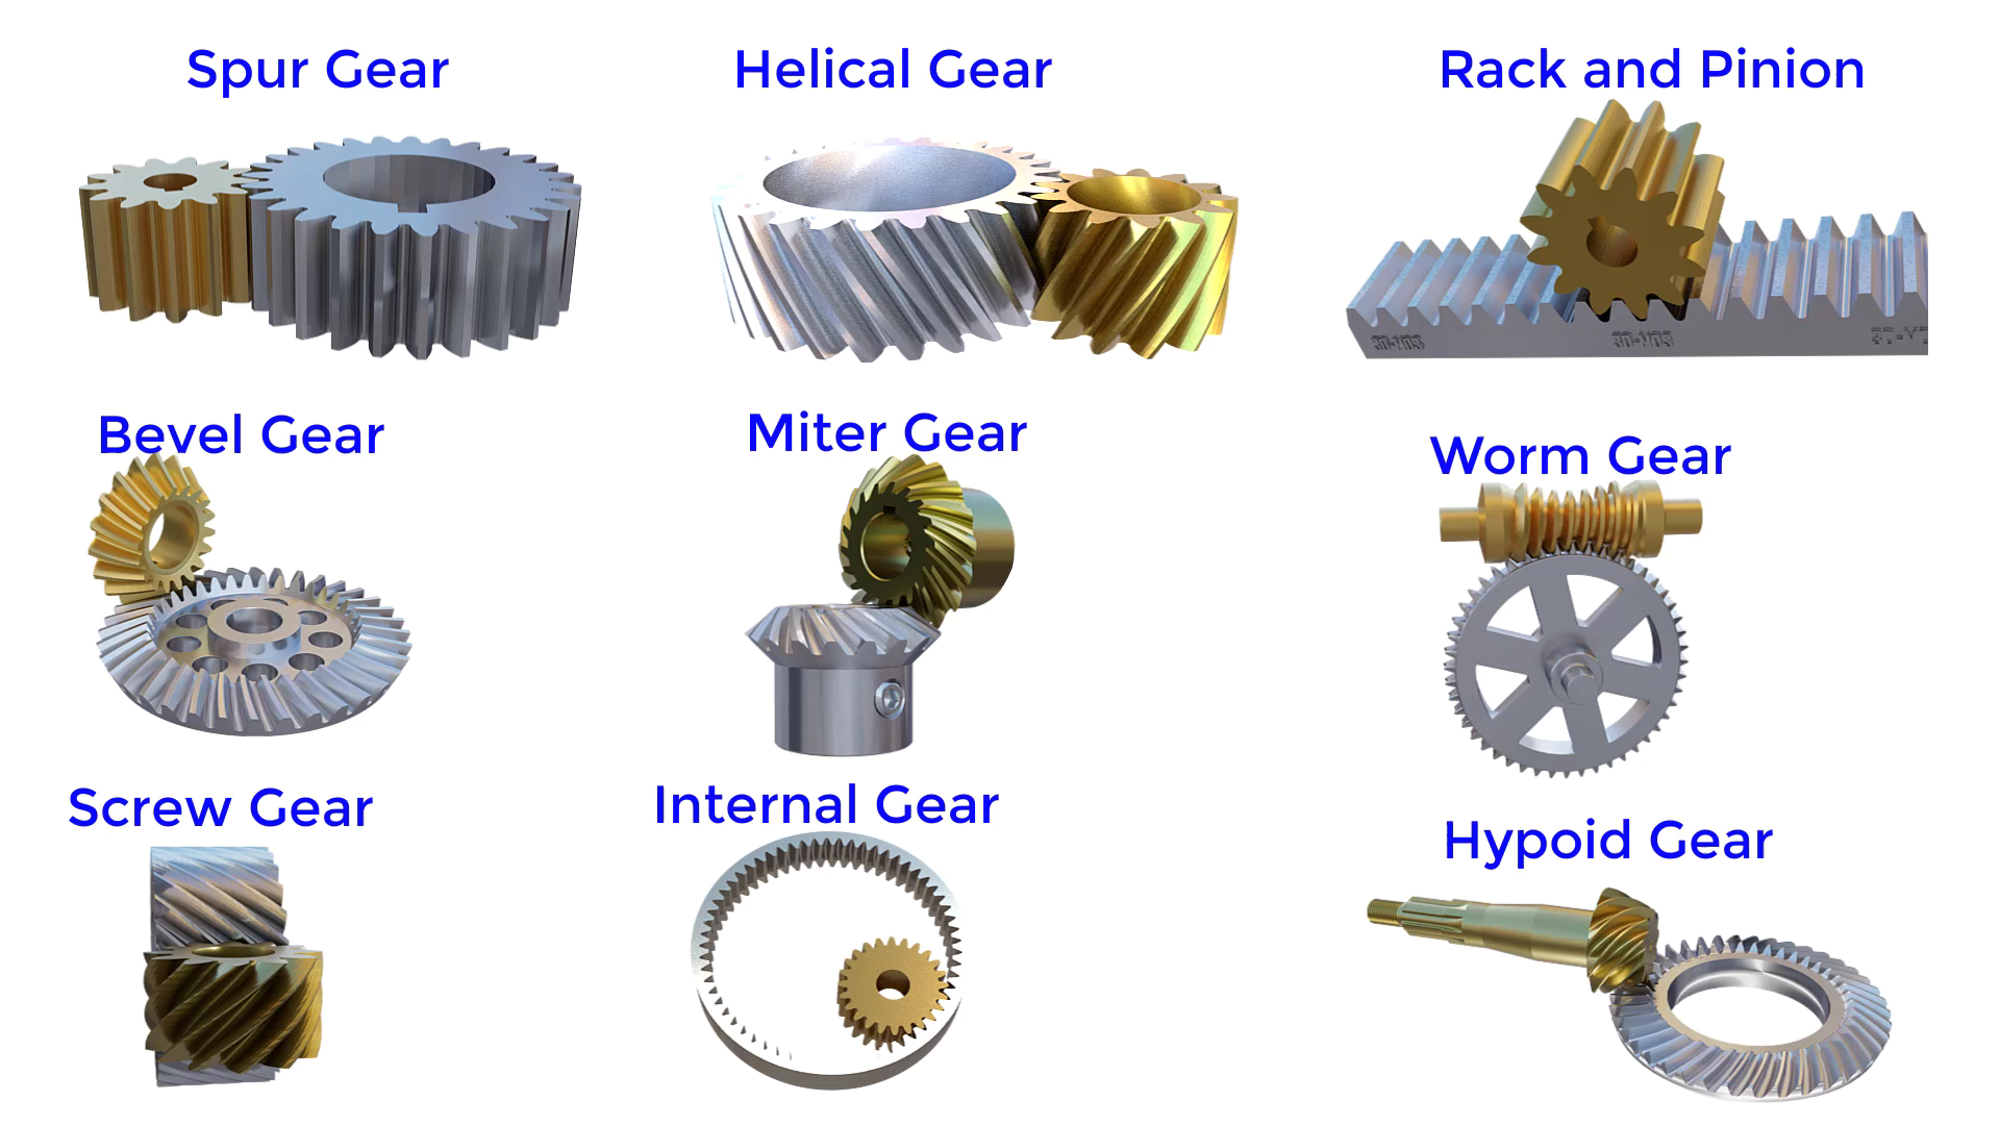 What Are the Different Types of Gears